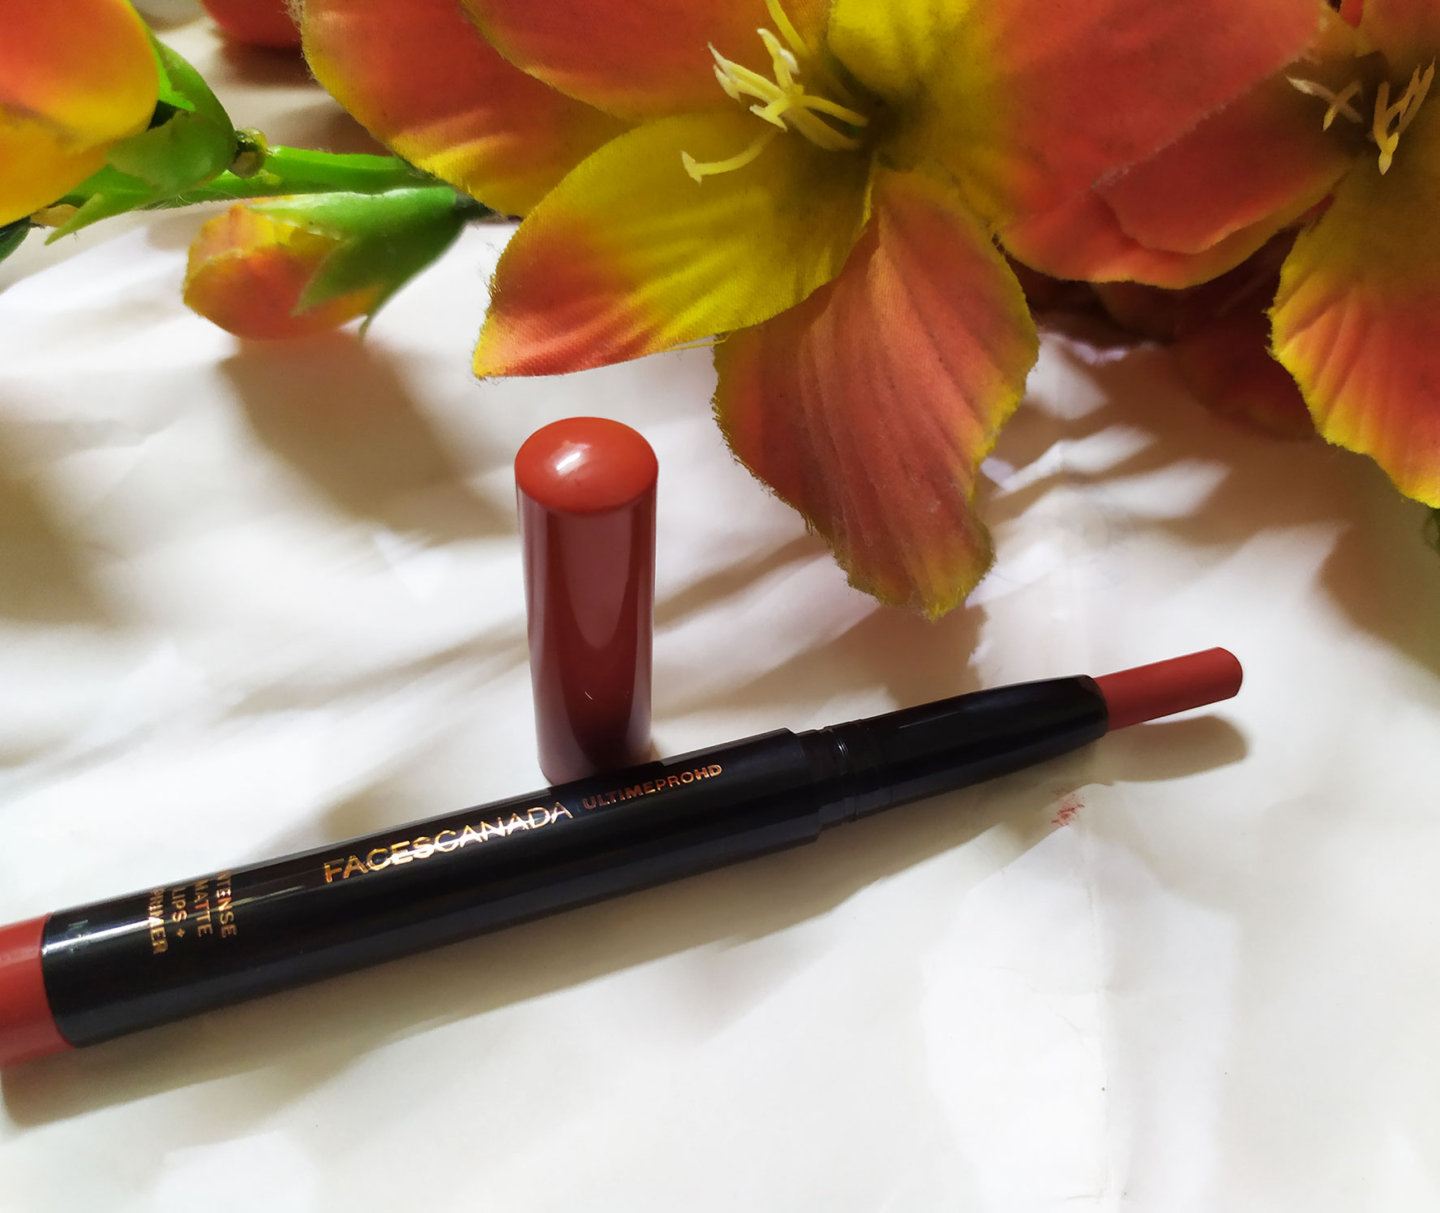 Faces HD Matte Lipstick-15 Obsessed Review